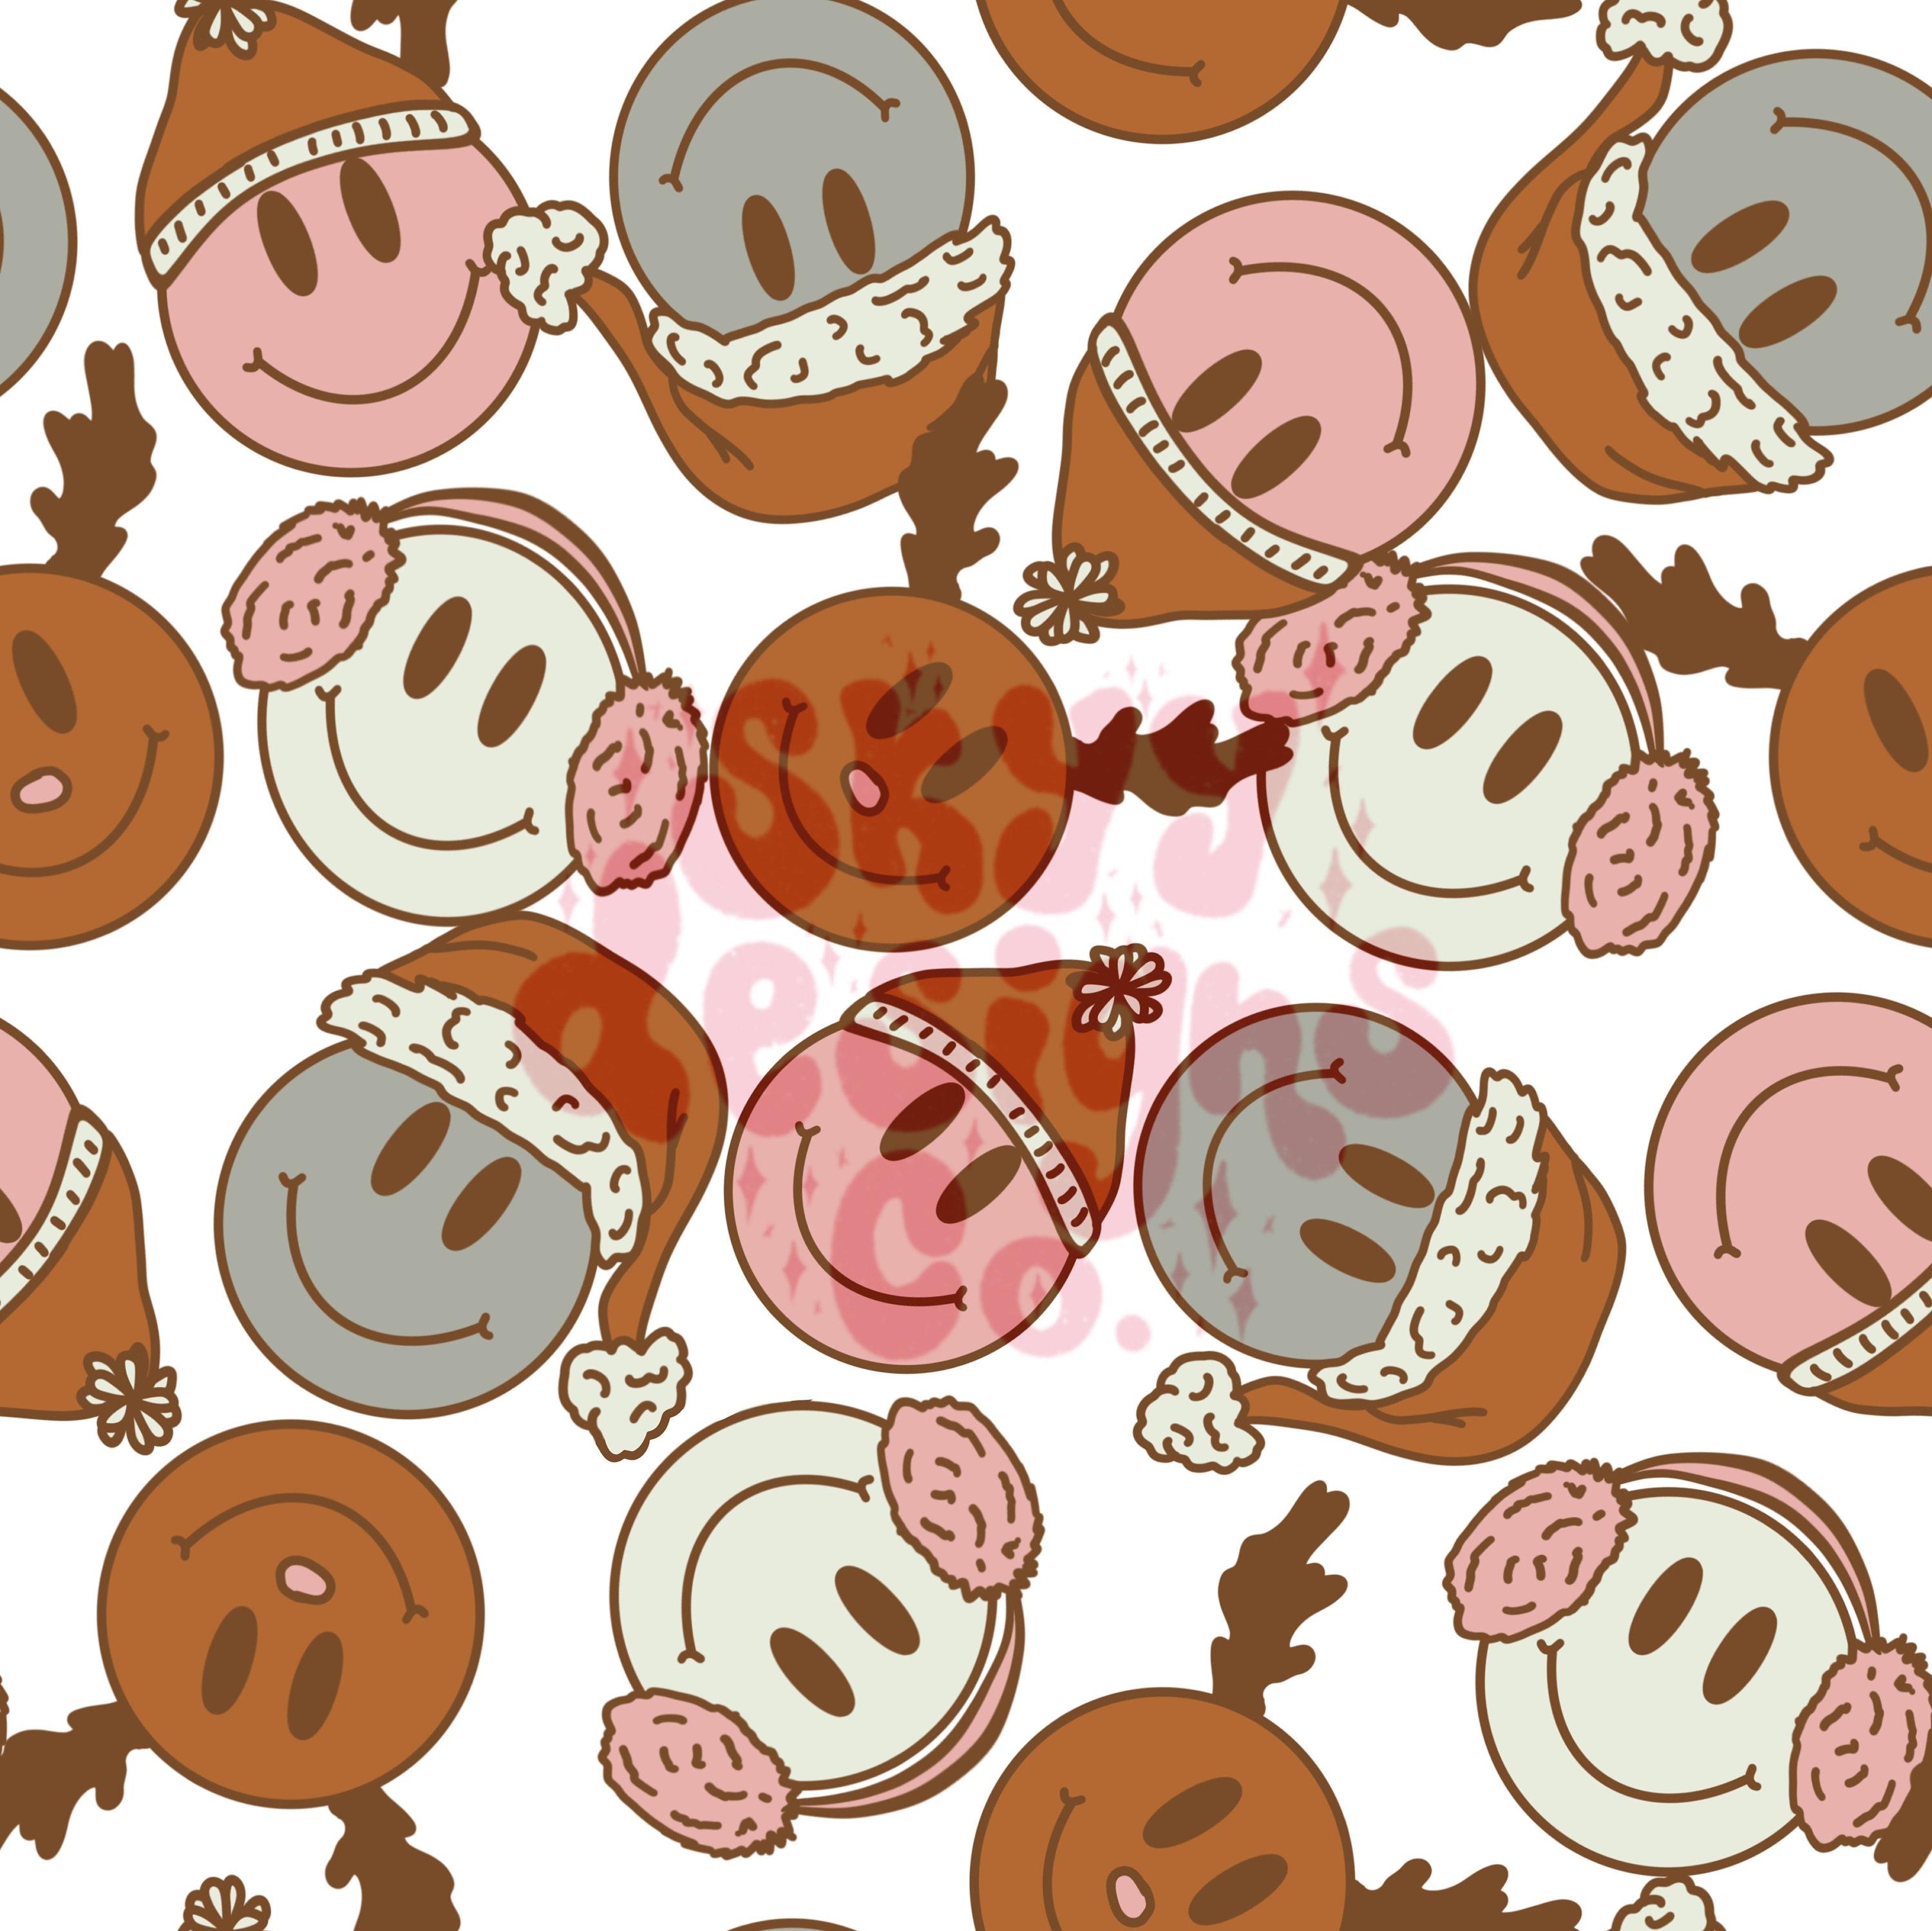 Smiley Face Christmas Digital Seamless Pattern For